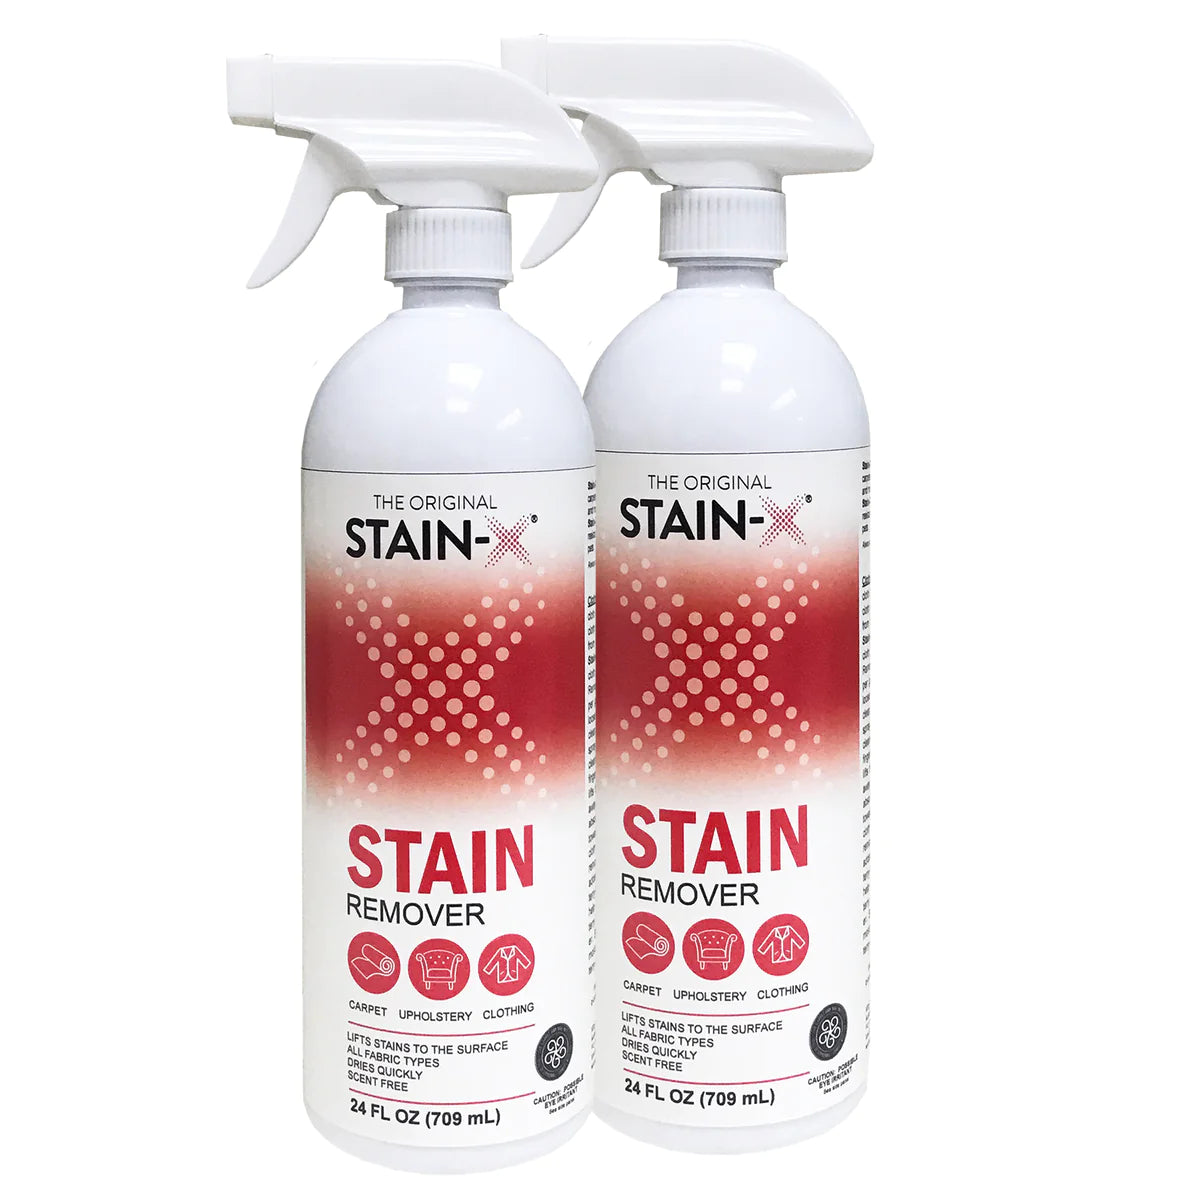 Stain-X Stain Remover